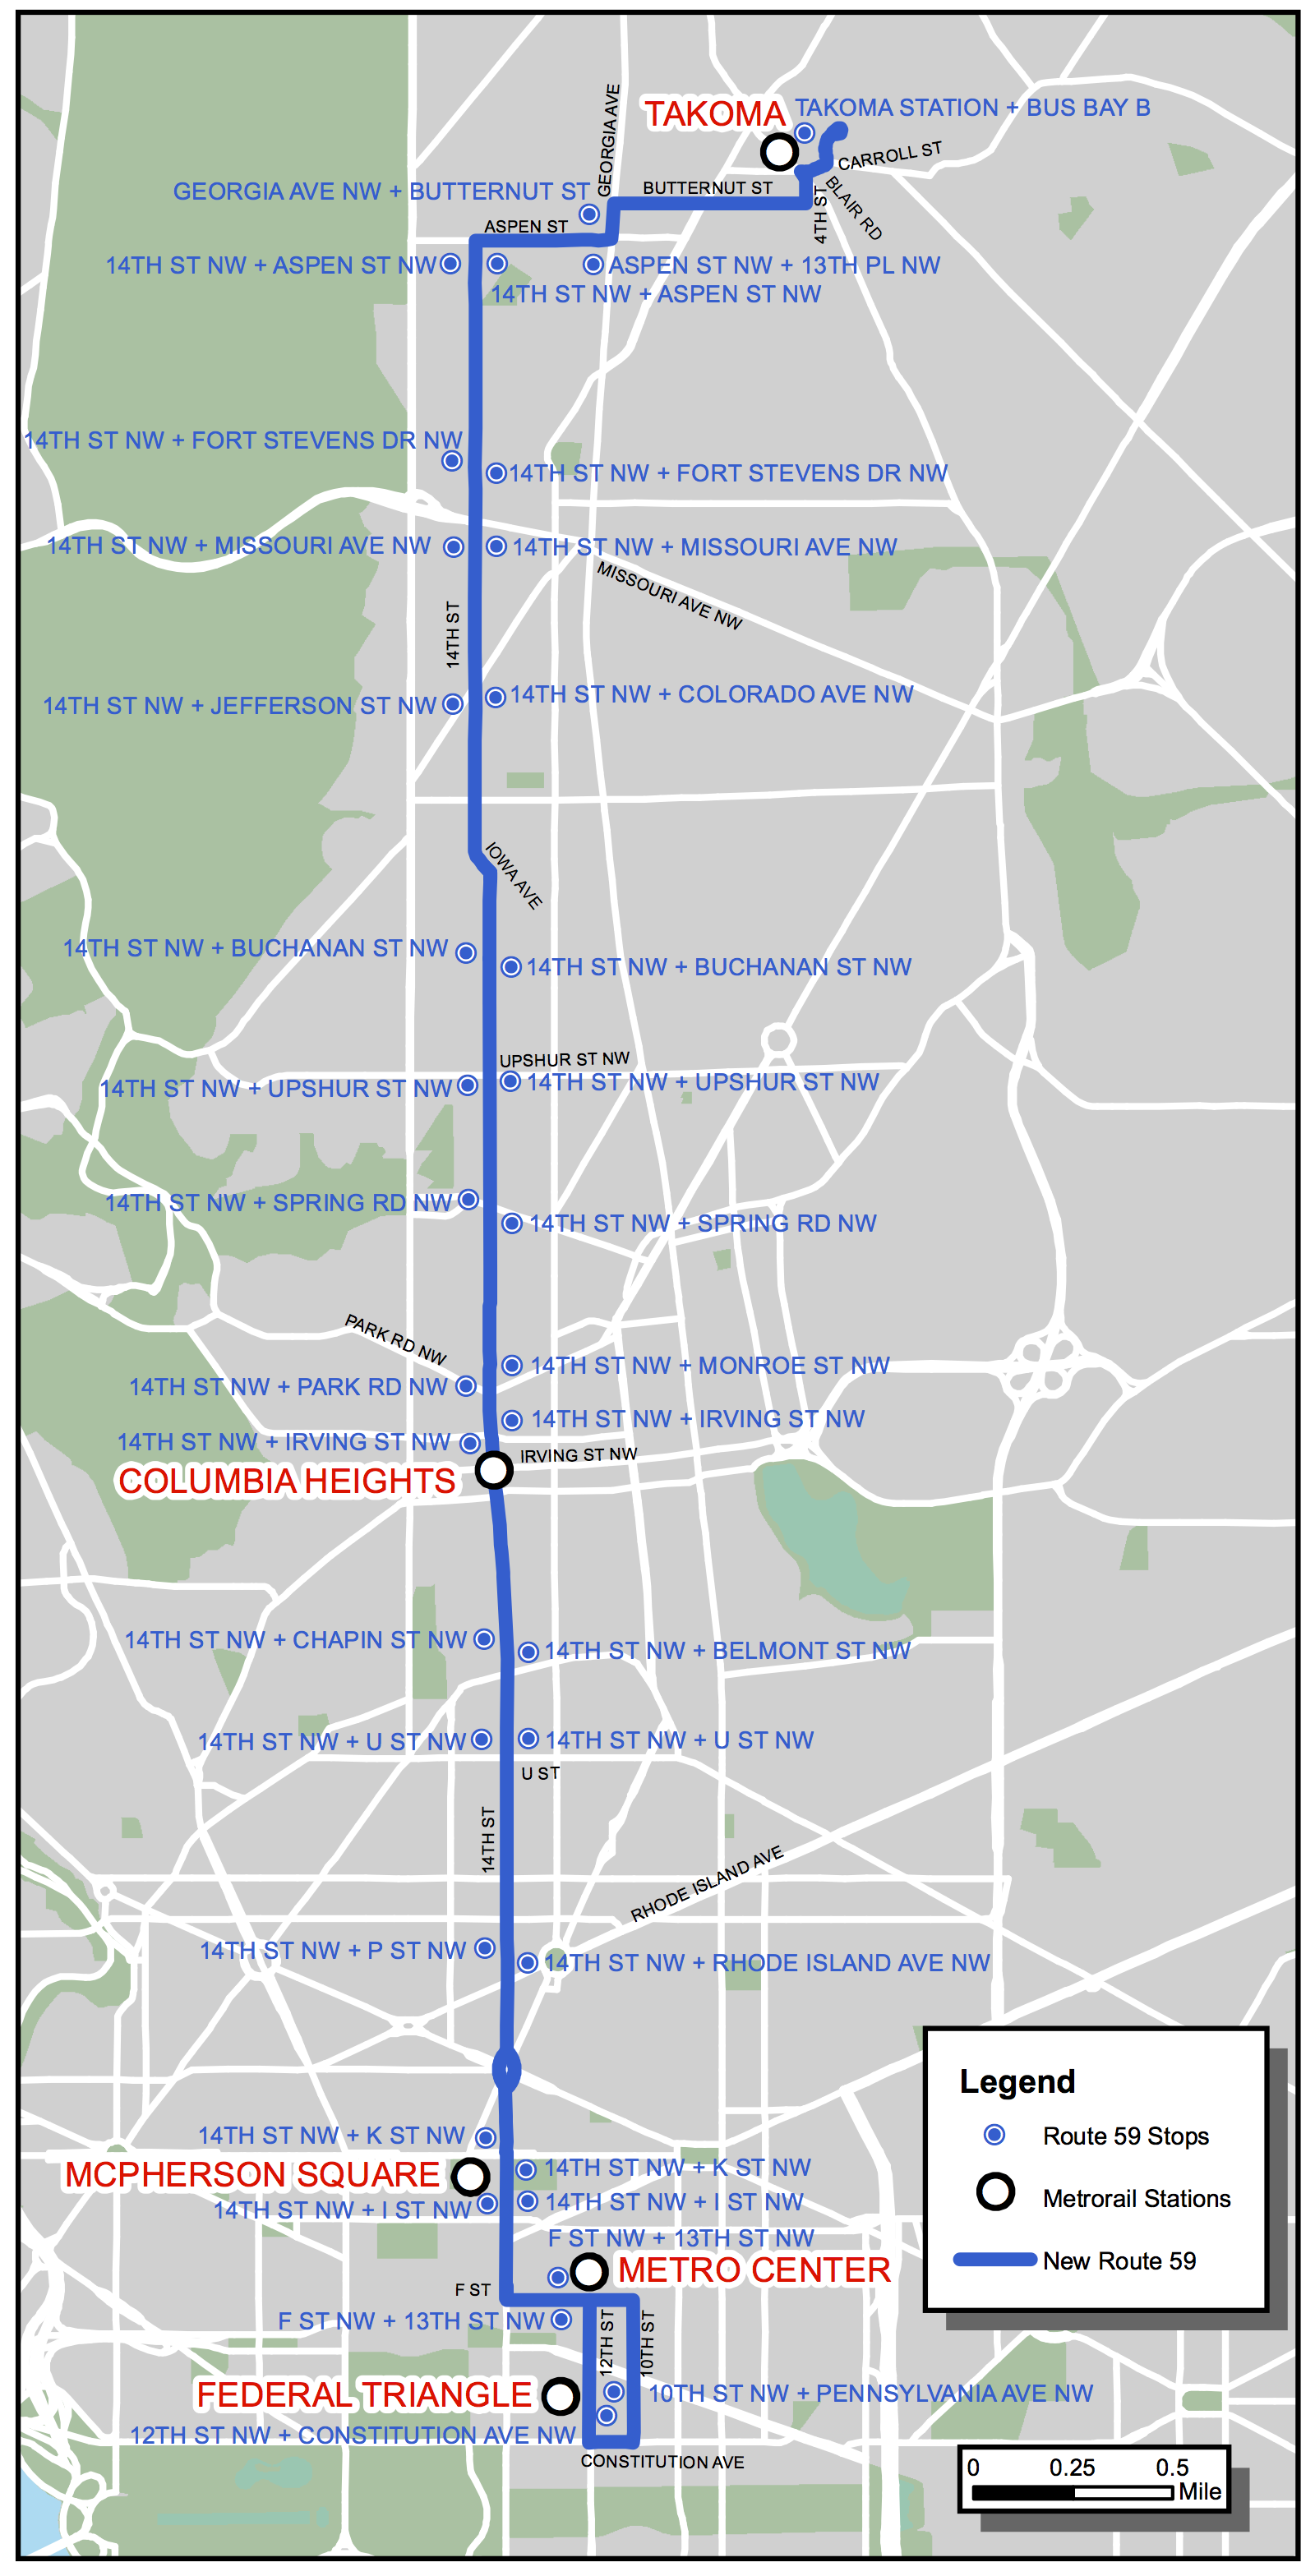 MetroExtra 59 route map